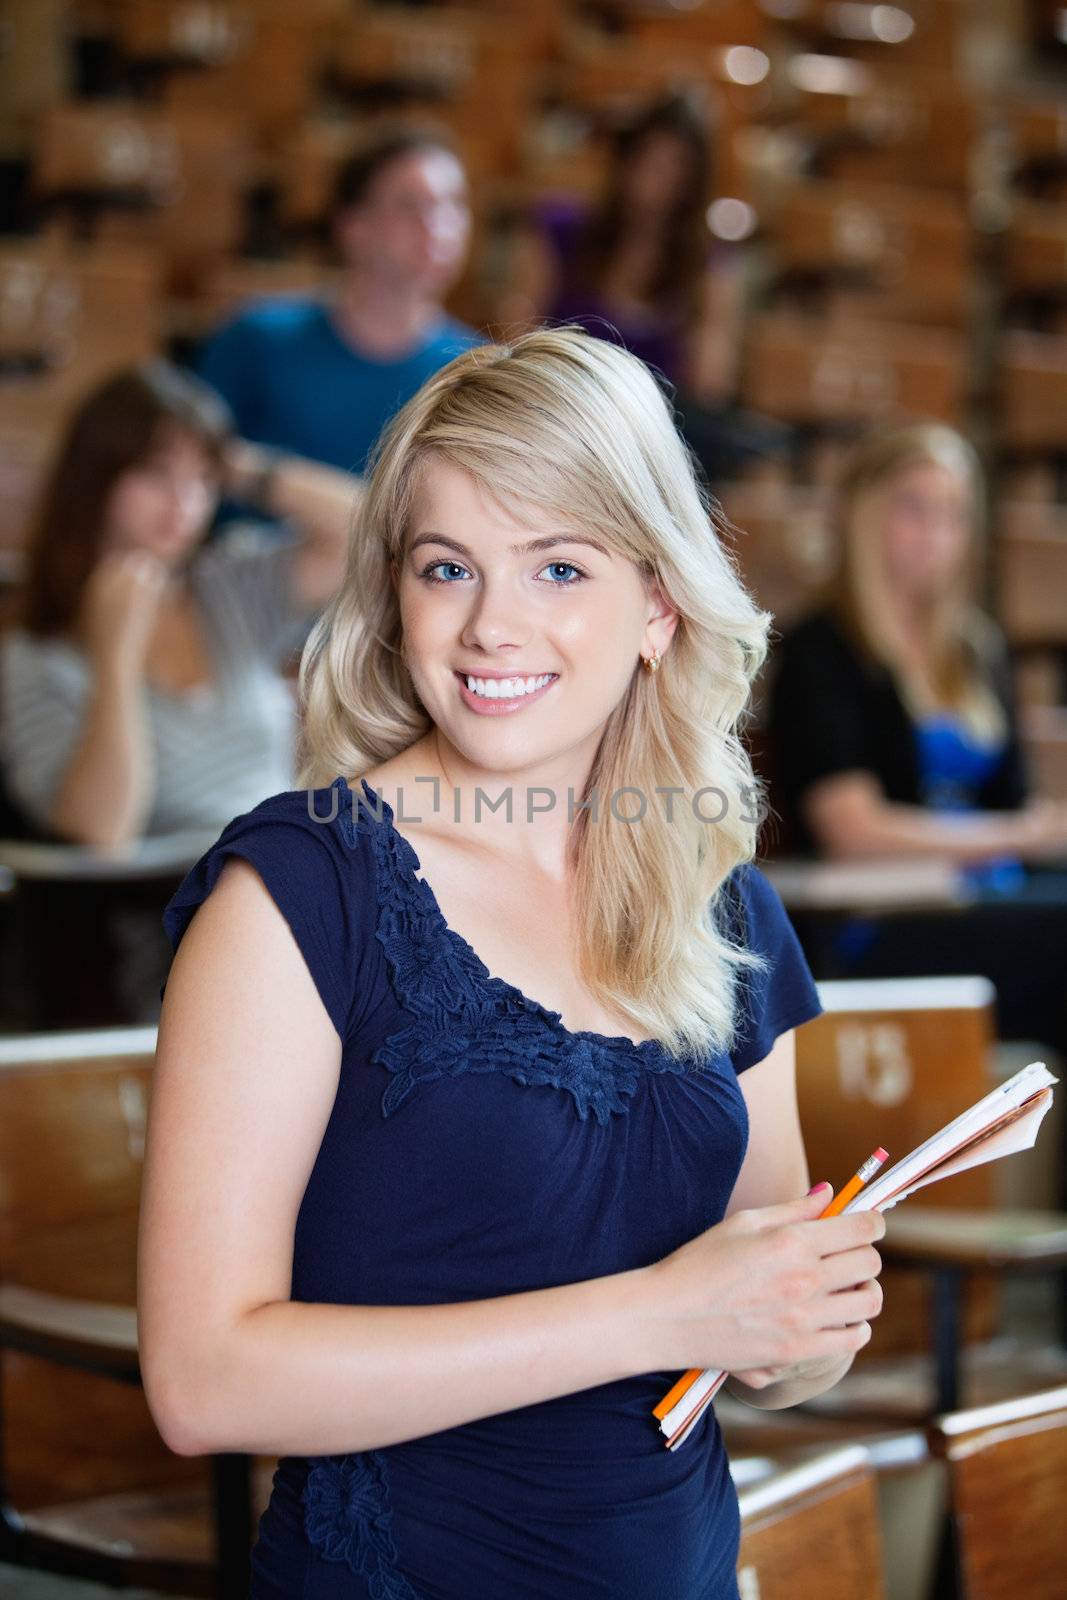 Portrait of young girl standing in auditorium with classmates in background